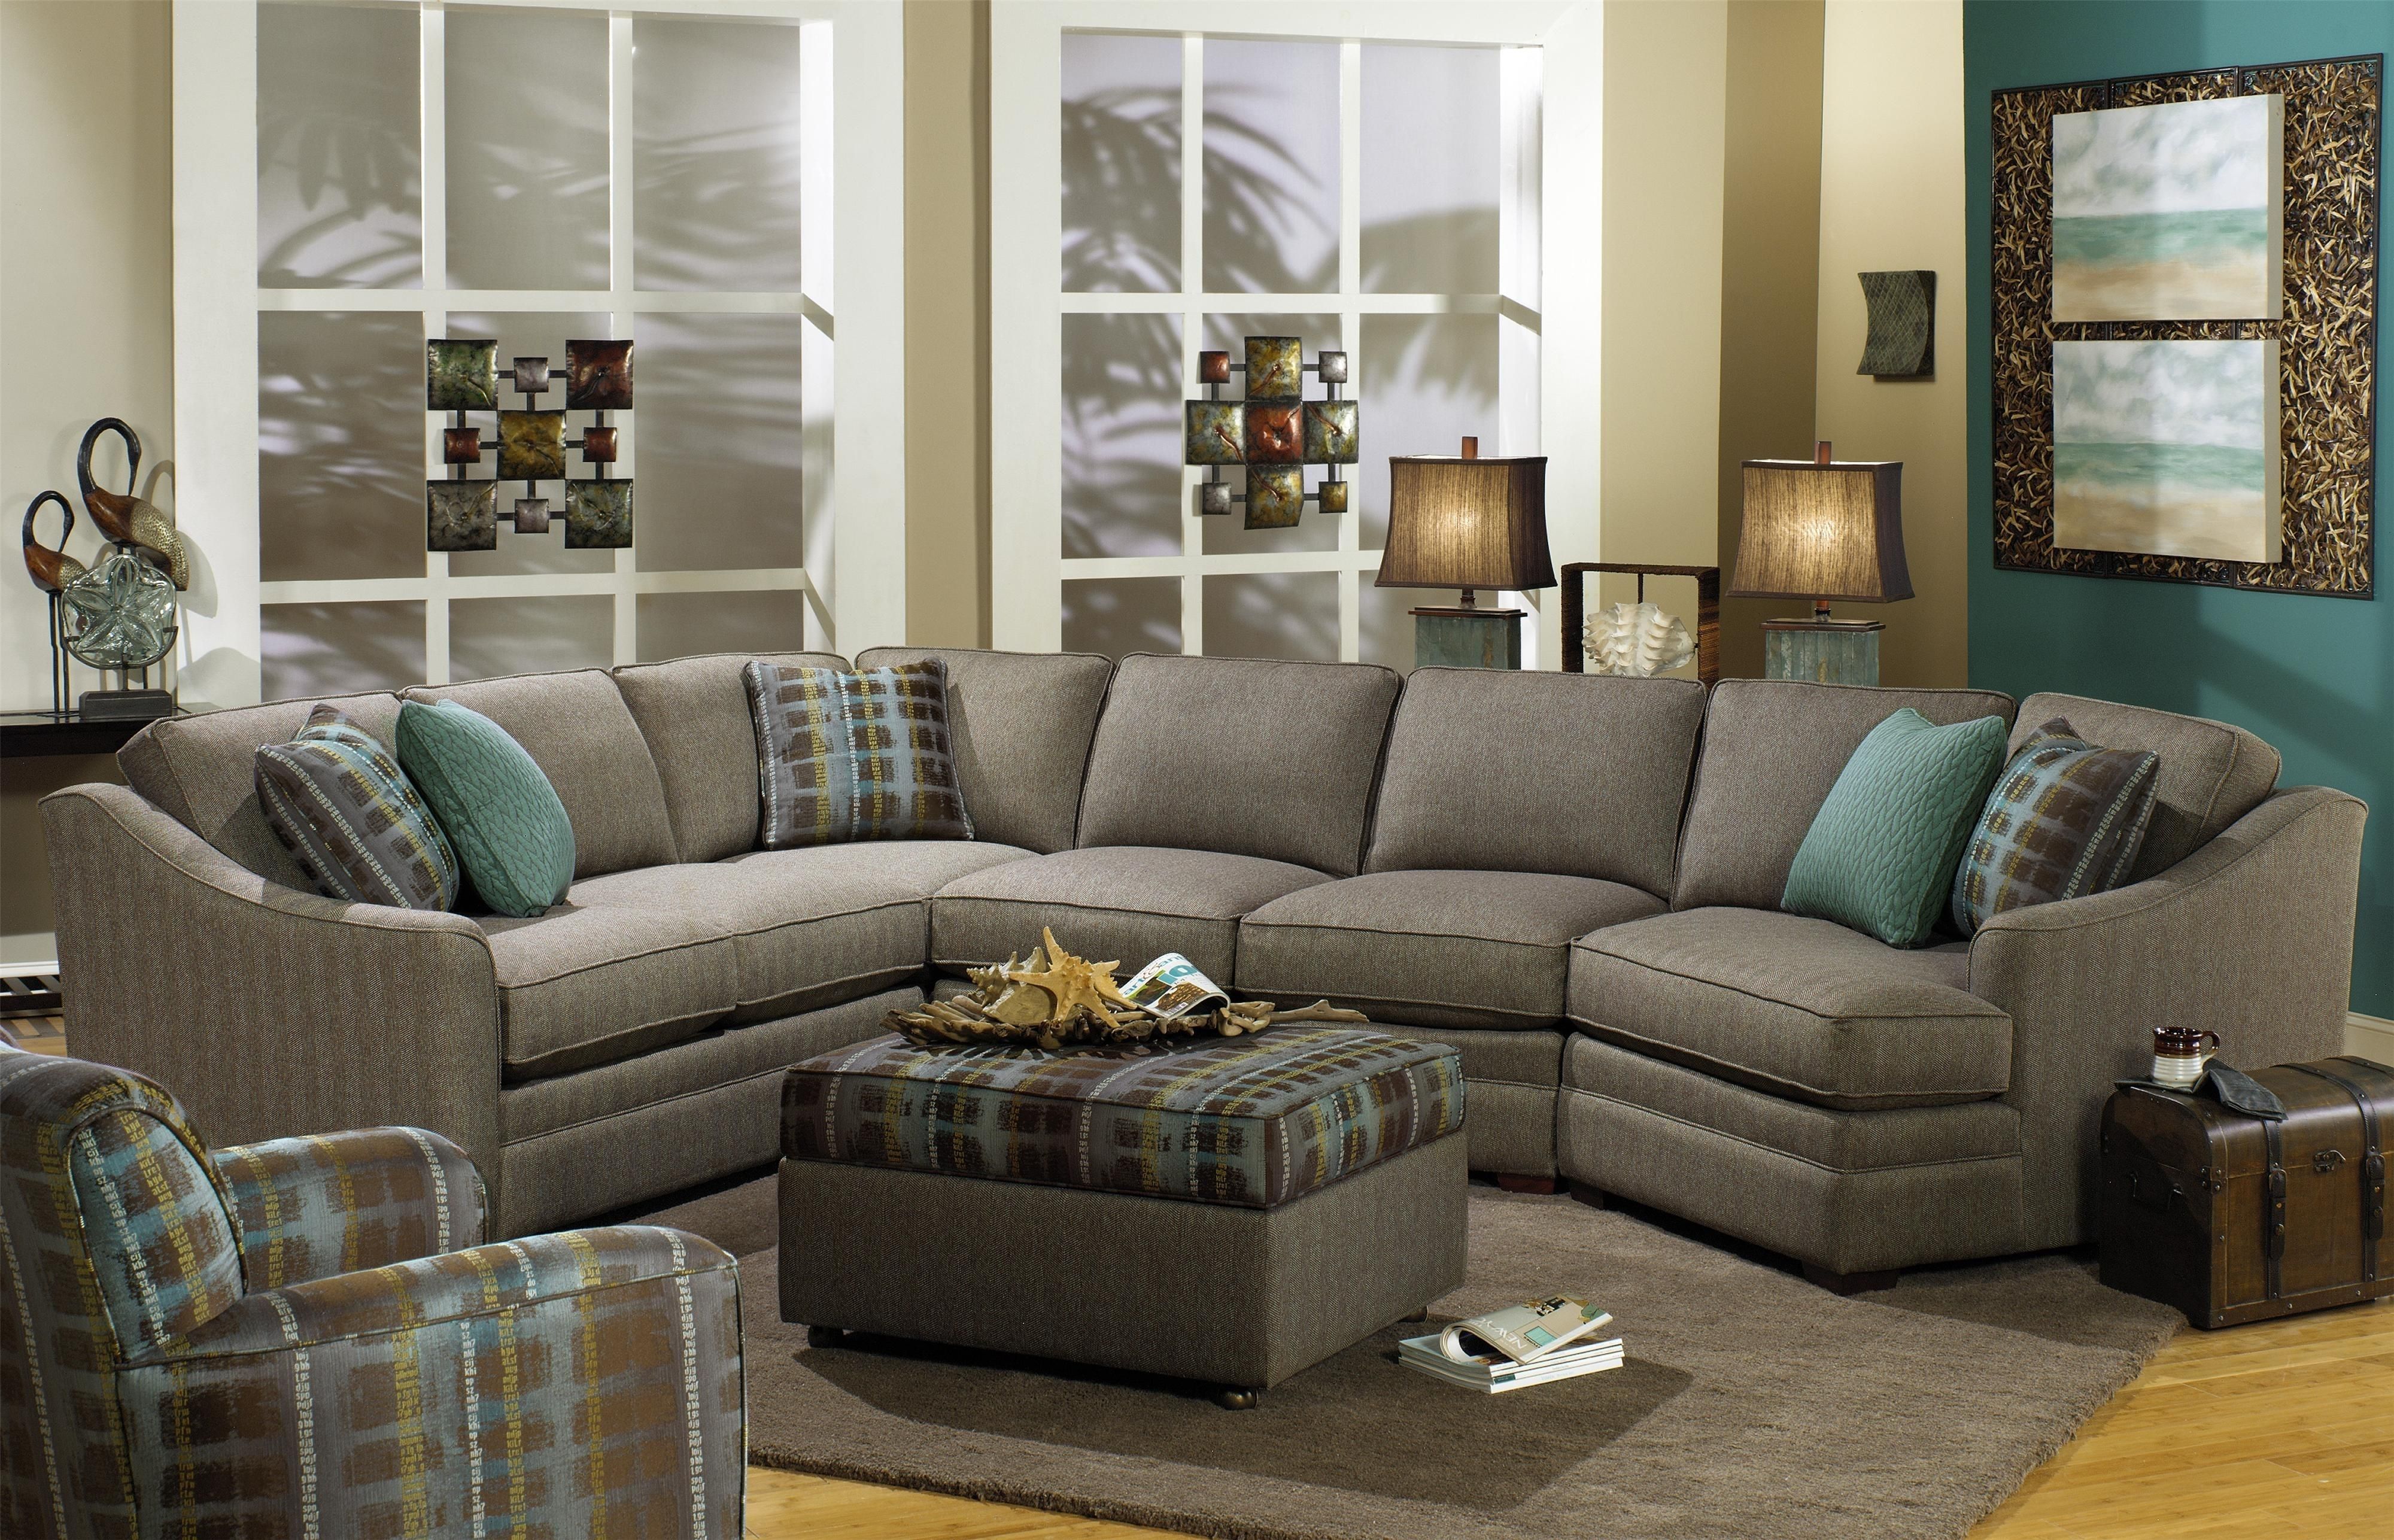 F9 Custom Collection Customizable 3 Piece Sectional With Laf Cuddler Regarding Killeen Tx Sectional Sofas (View 10 of 10)